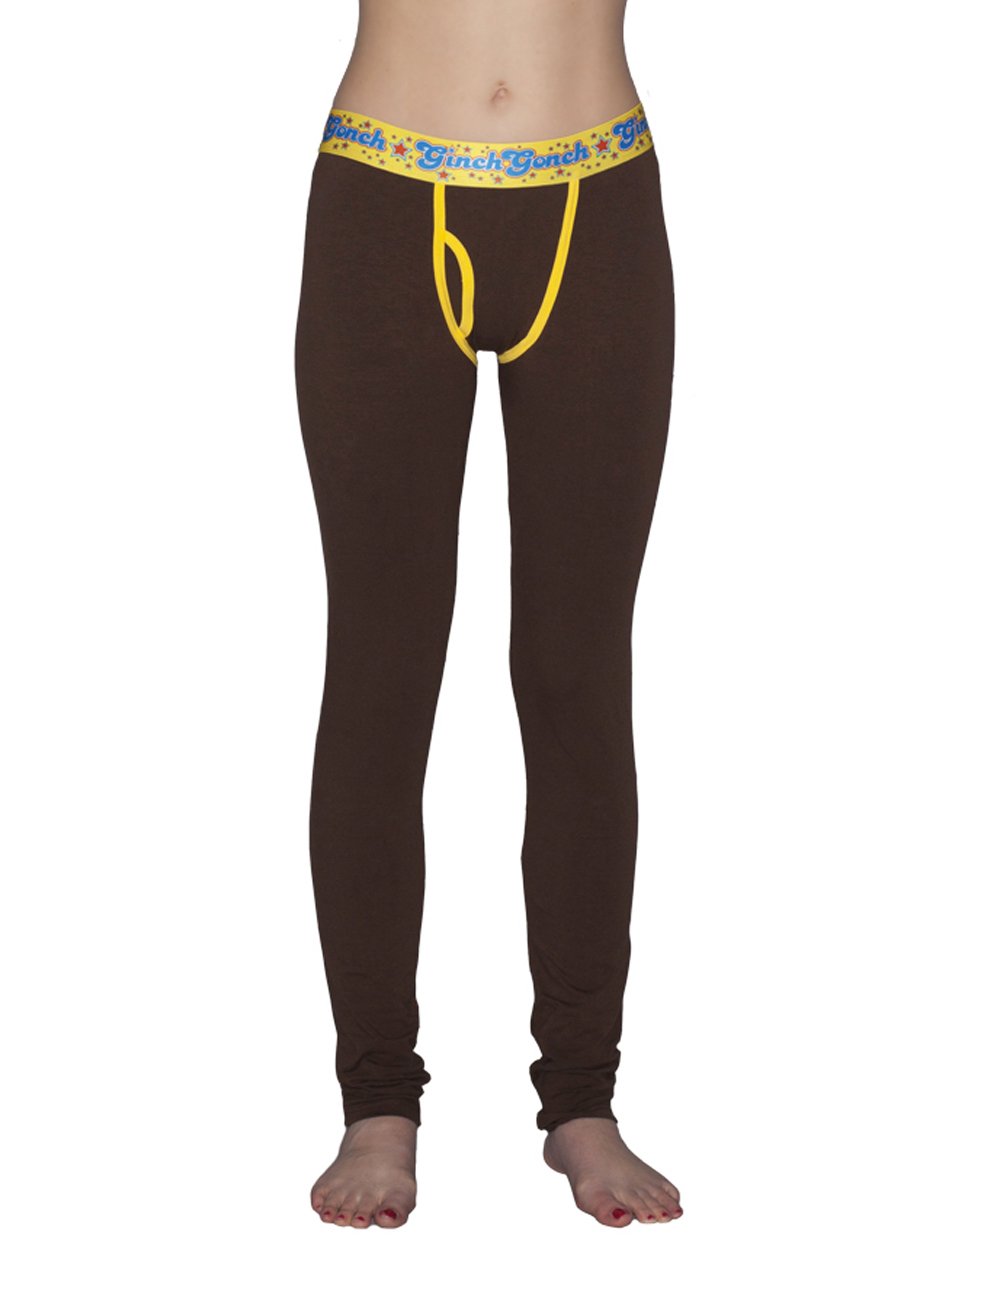 GG Ginch Gonch Lemon Heads women's long underwear y front legging trunk with brown fabric, yellow trim, and a printed yellow waistband. front. 